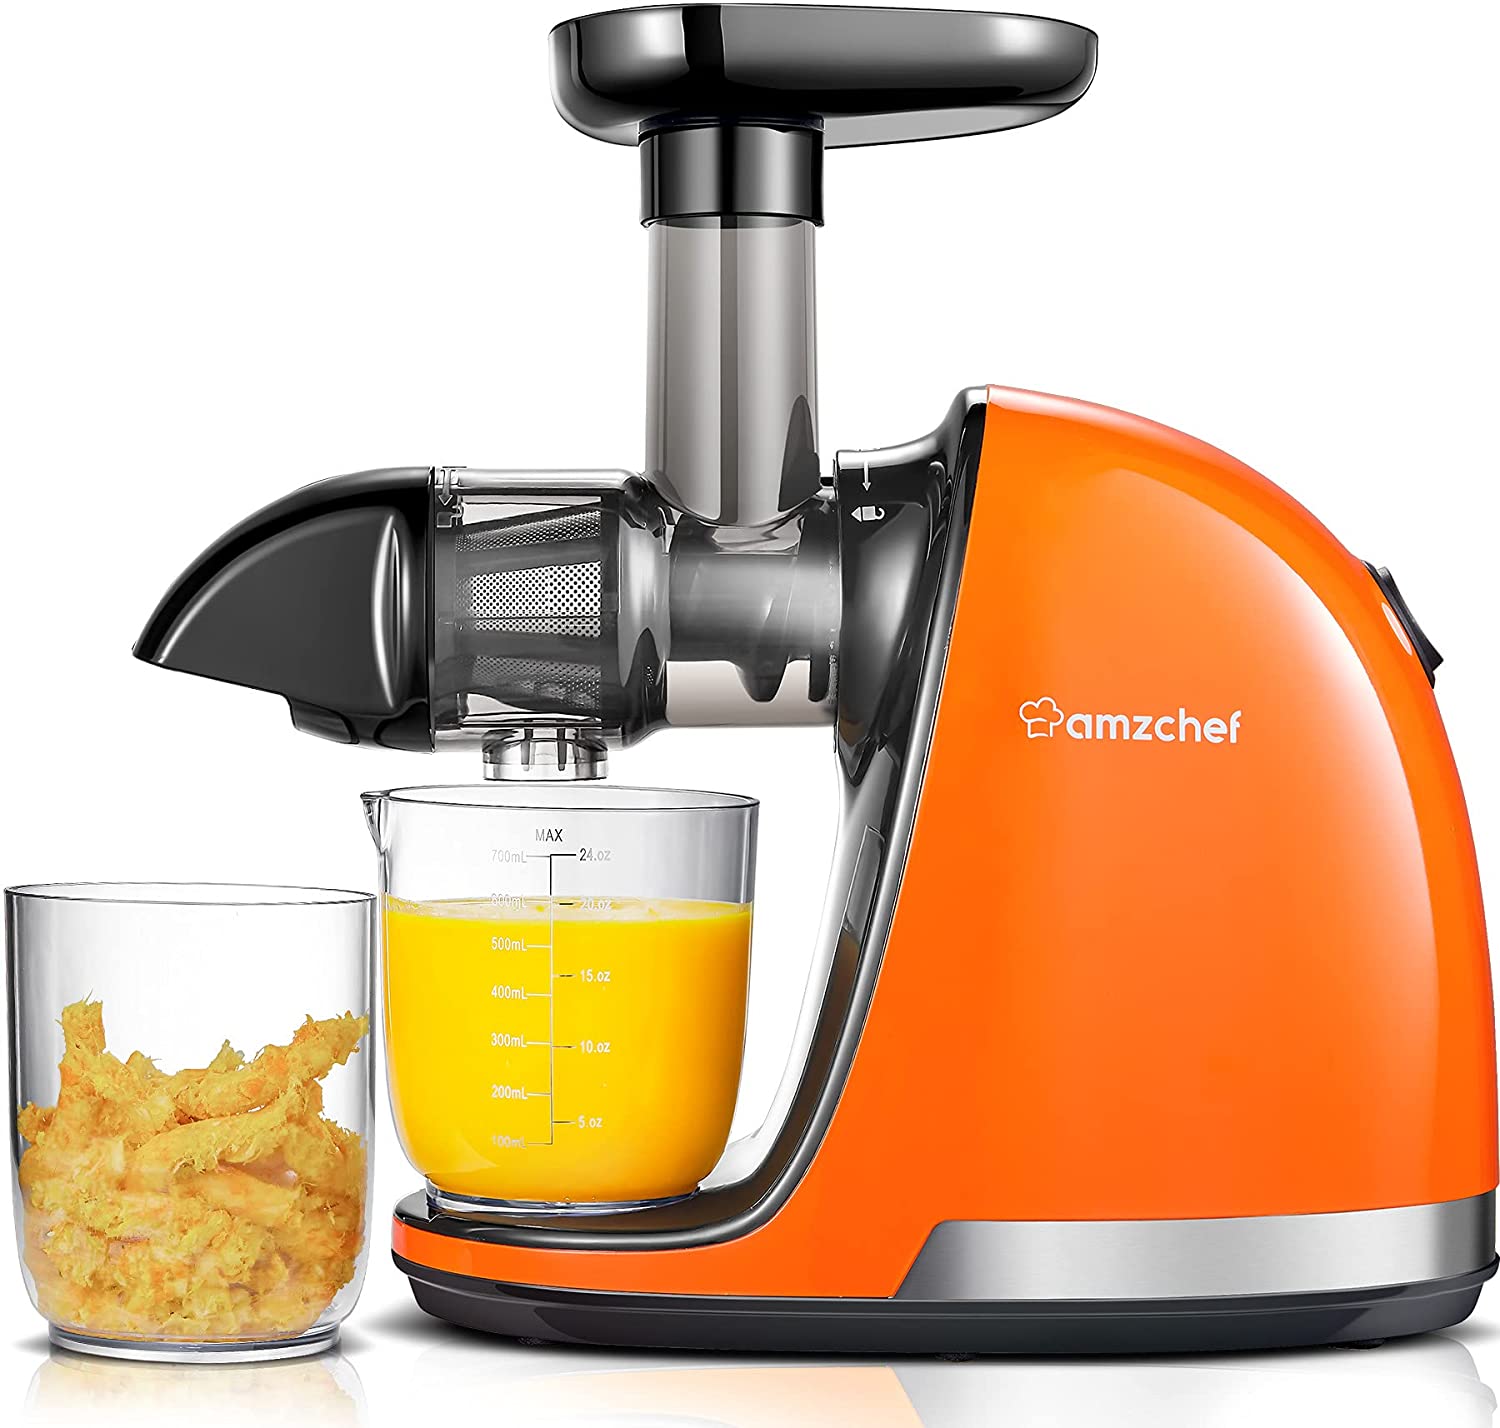 http://iamzchef.com/cdn/shop/products/amzchefColdPressJuicer_SlowMasticatingJuicerMachineswithReverseFunctionAnti-Clogging_QuietMotorSlowJuicerExtractorwithBrush_FruitJuicerwithPlasticWrench_forHighNutrientFruit_Vegetable_83a1b190-0e22-4e66-a185-fb71acfa960b.jpg?v=1646036461